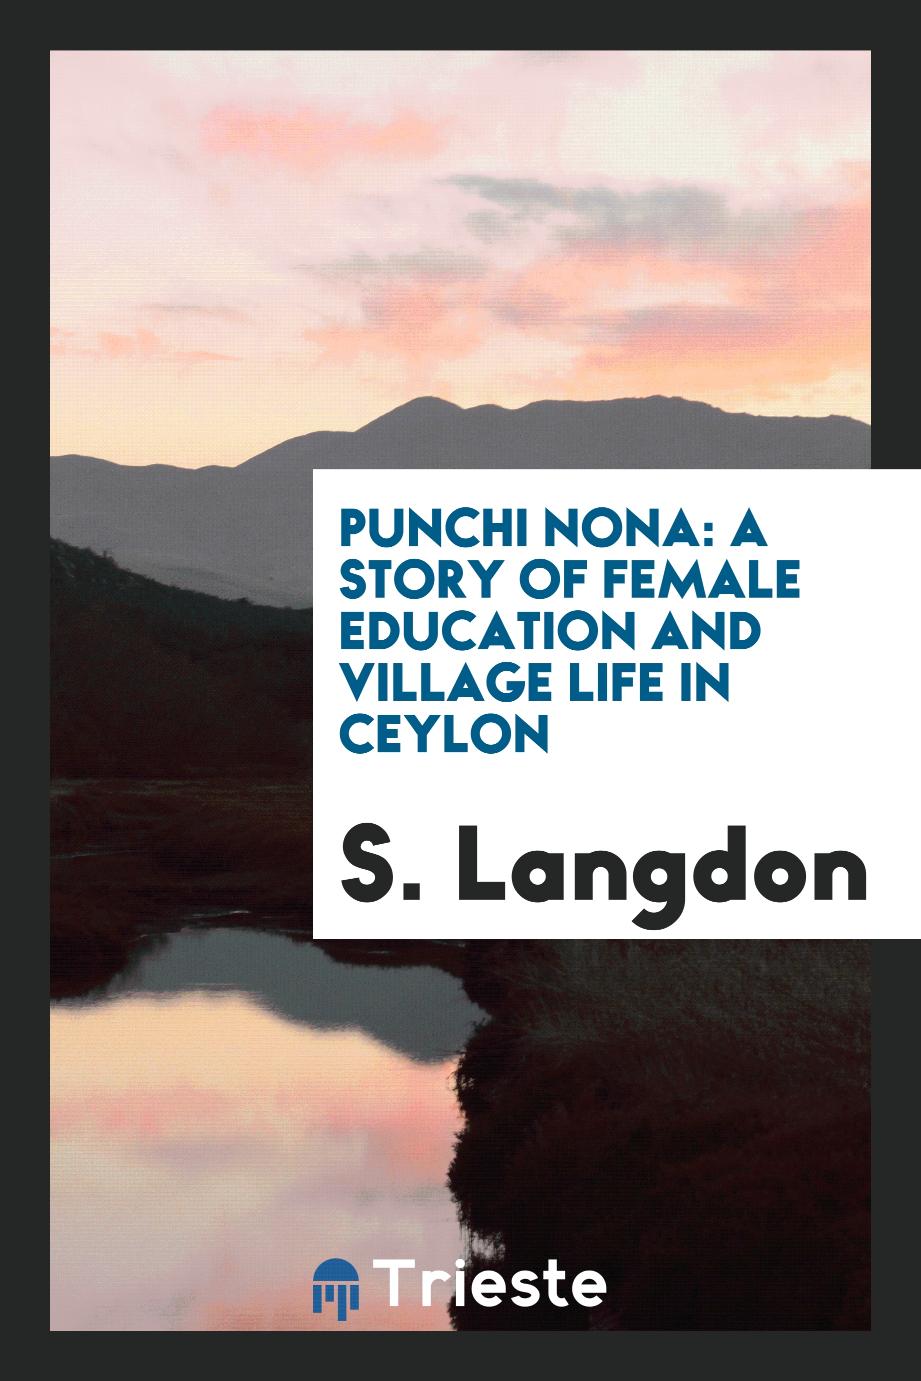 Punchi Nona: A Story of Female Education and Village Life in Ceylon